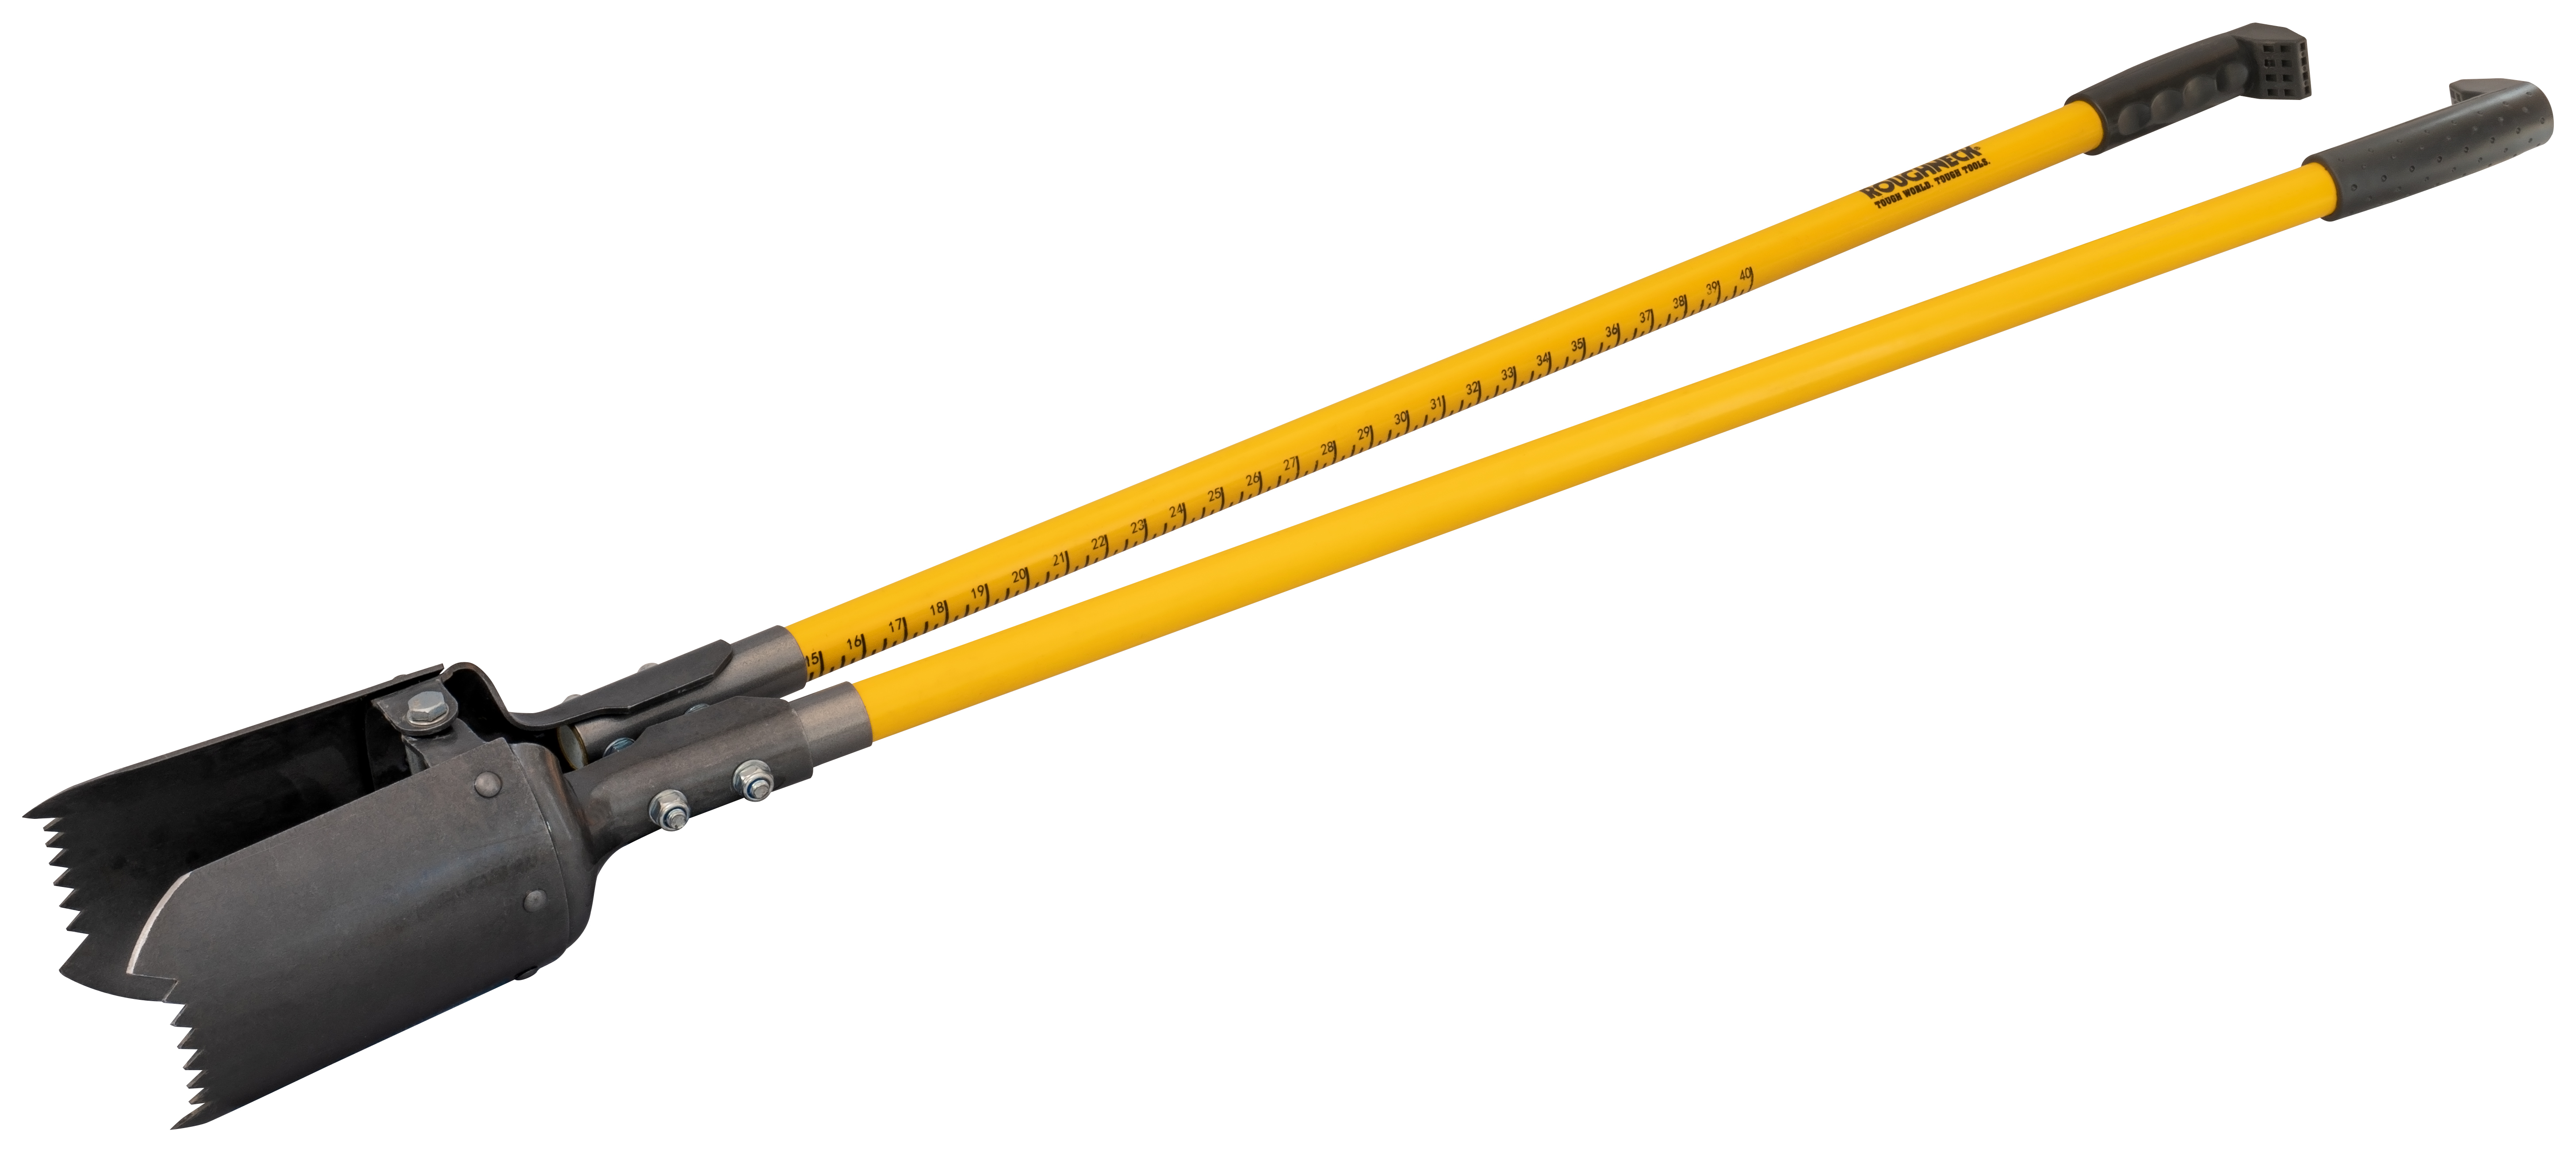 Roughneck® ROU68255 Sharp-Edge Serrated Post Hole Digger | Wickes.co.uk